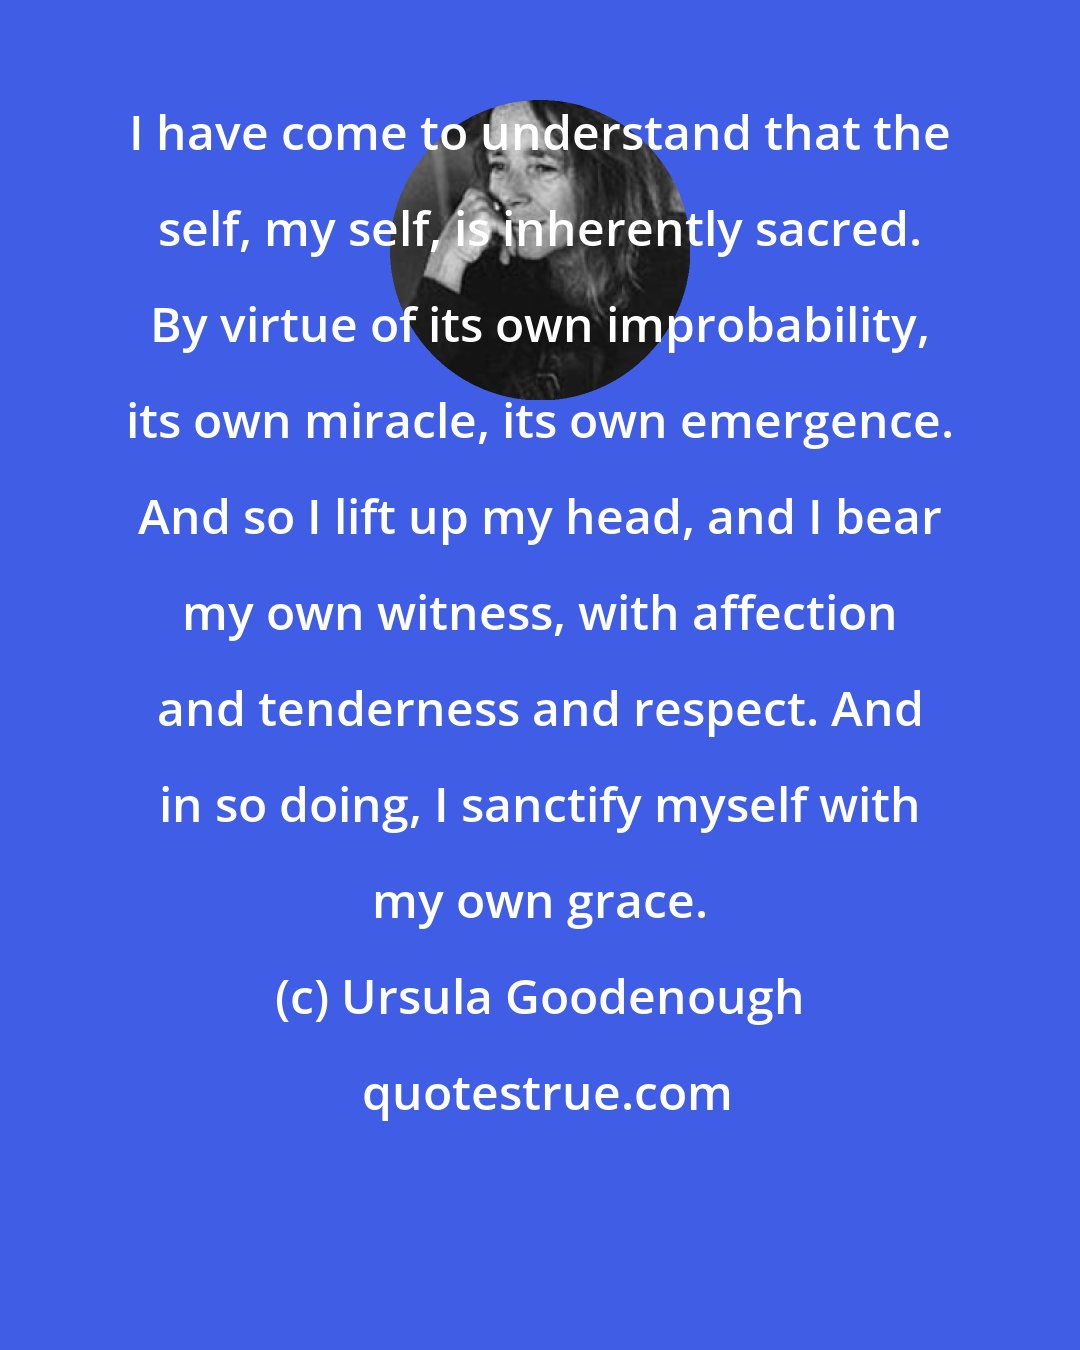 Ursula Goodenough: I have come to understand that the self, my self, is inherently sacred. By virtue of its own improbability, its own miracle, its own emergence. And so I lift up my head, and I bear my own witness, with affection and tenderness and respect. And in so doing, I sanctify myself with my own grace.